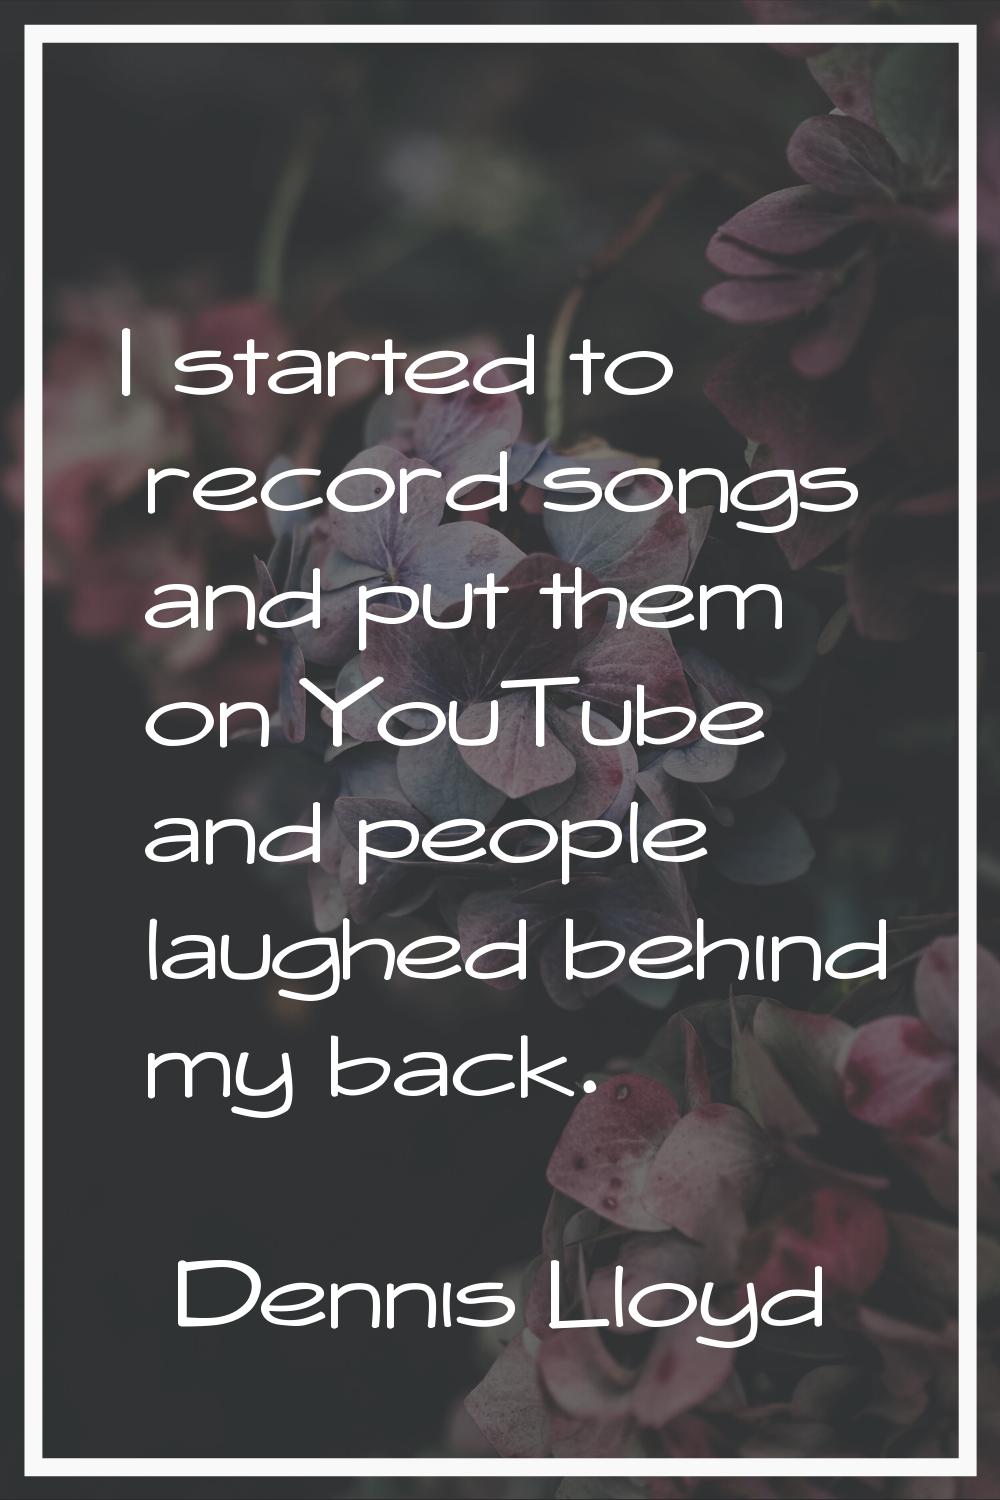 I started to record songs and put them on YouTube and people laughed behind my back.